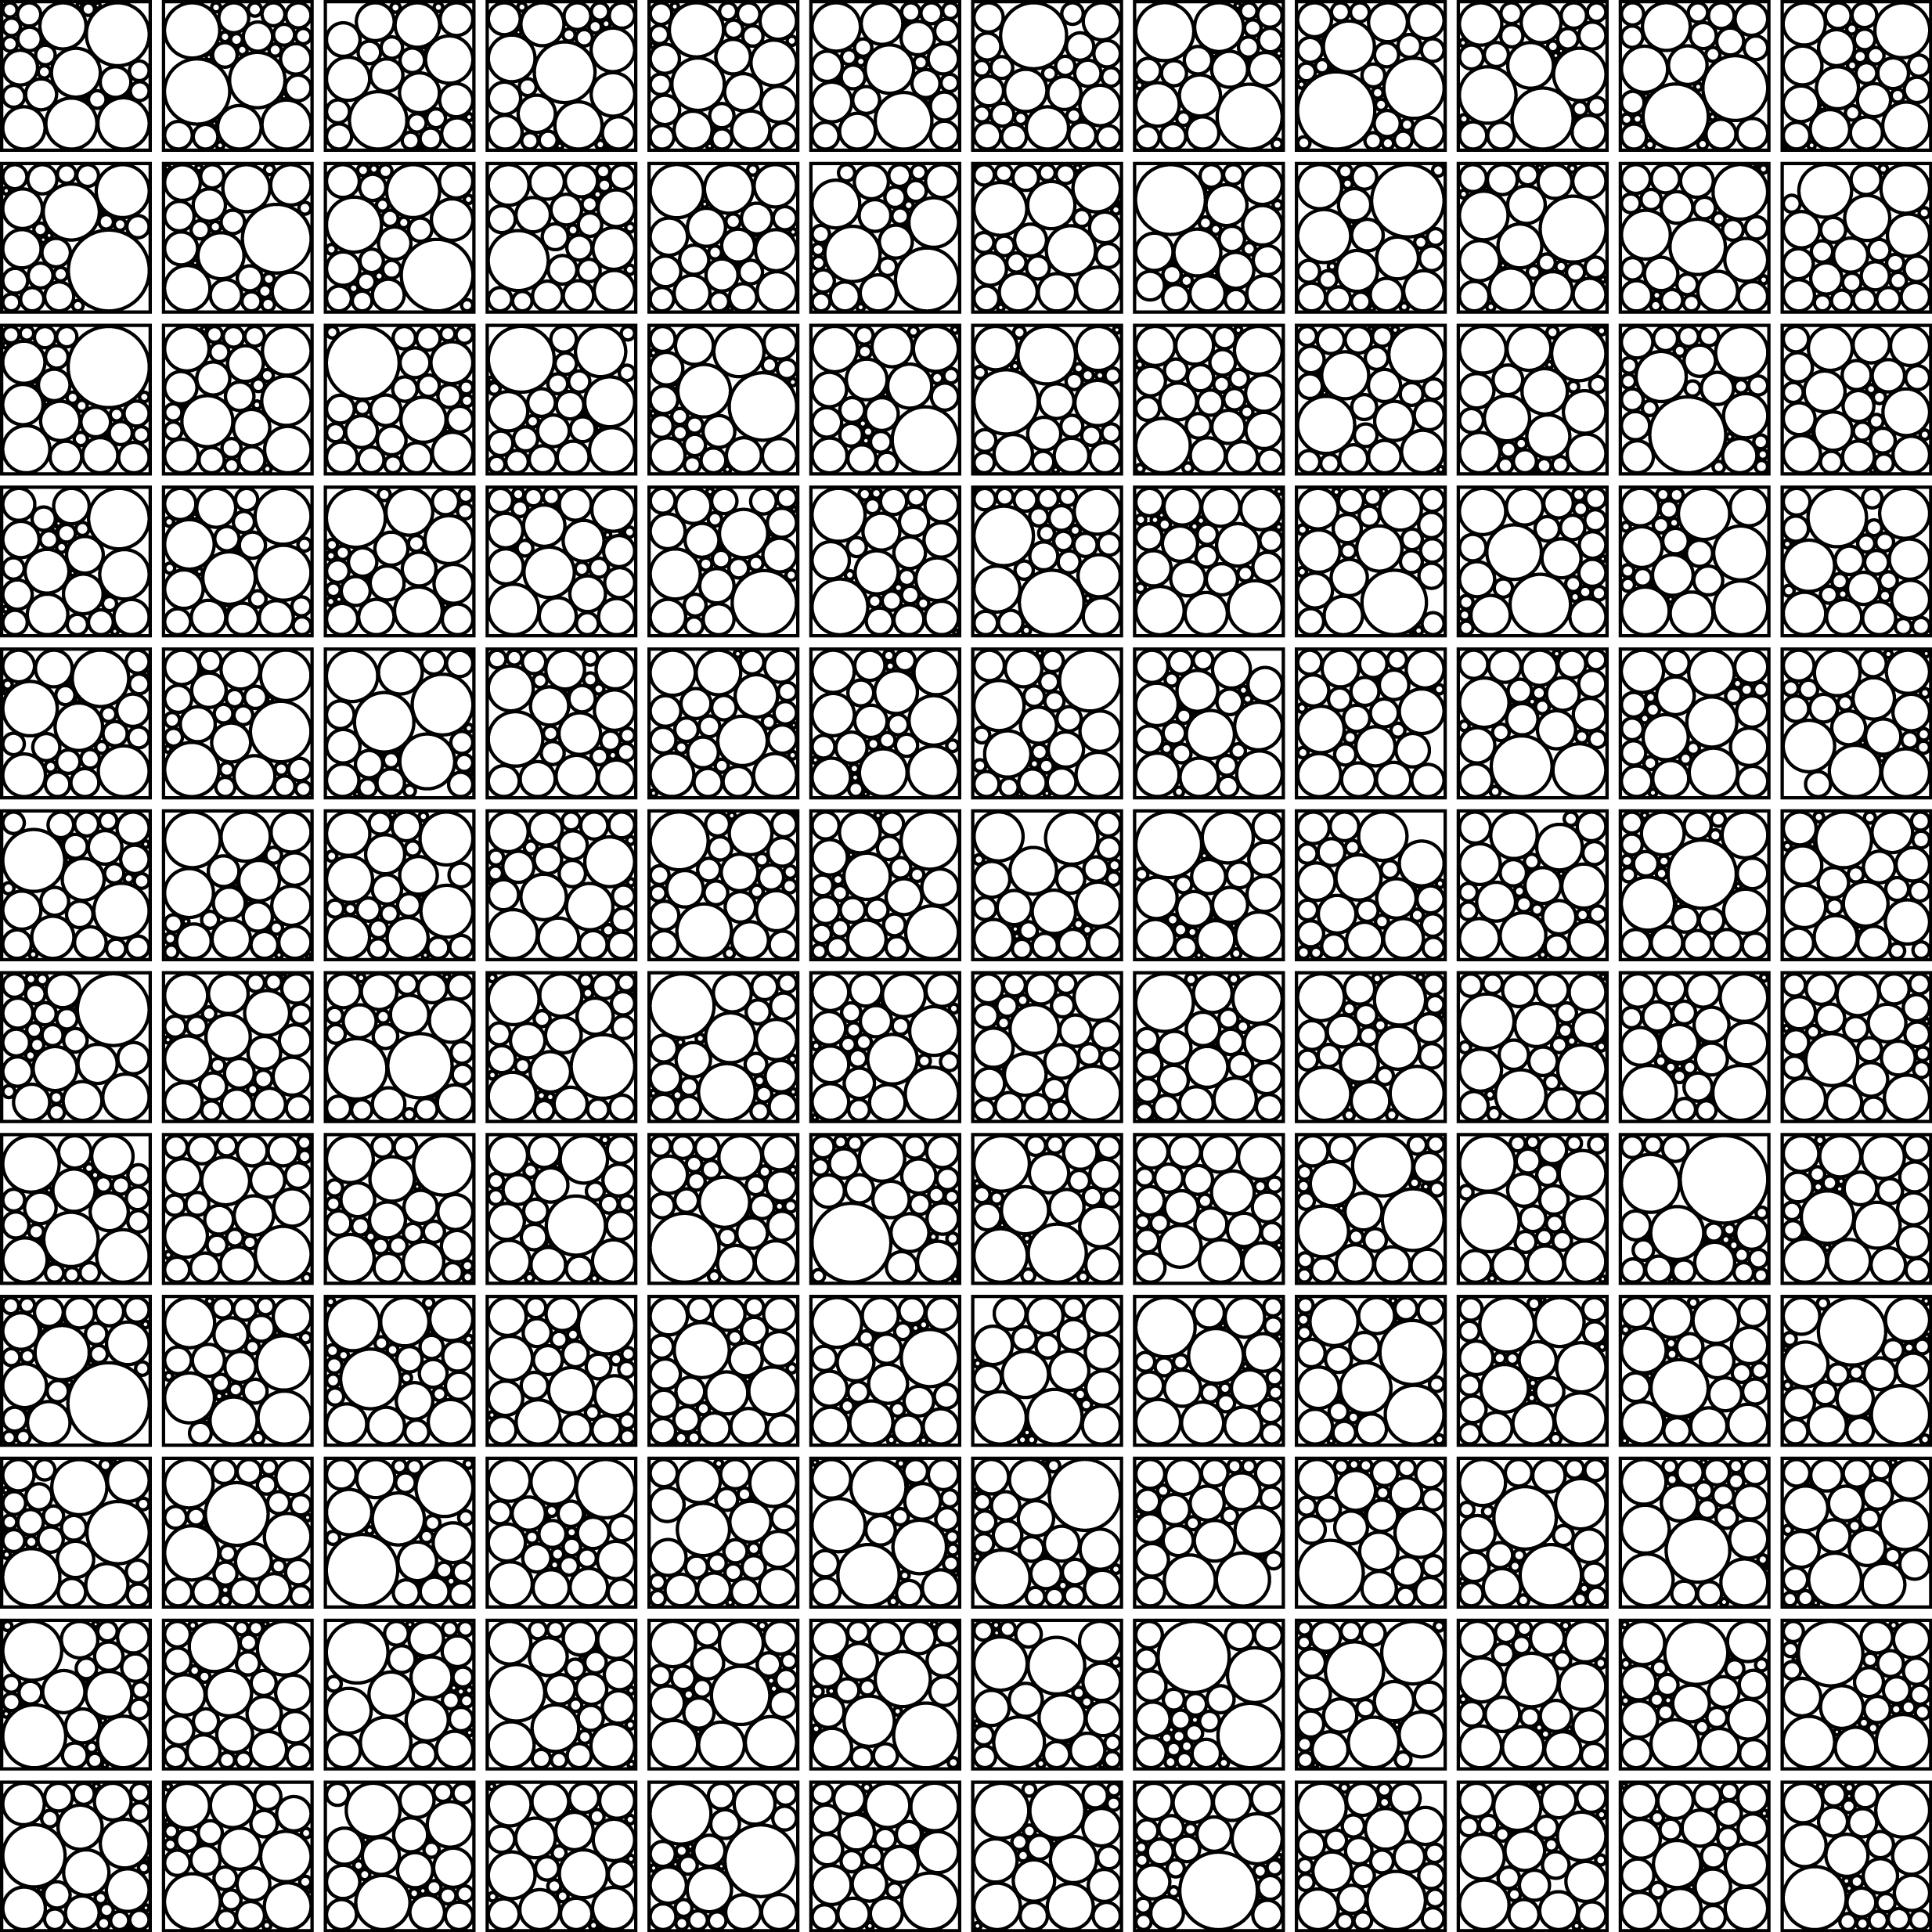 144 sets of 27 circles packed into squares